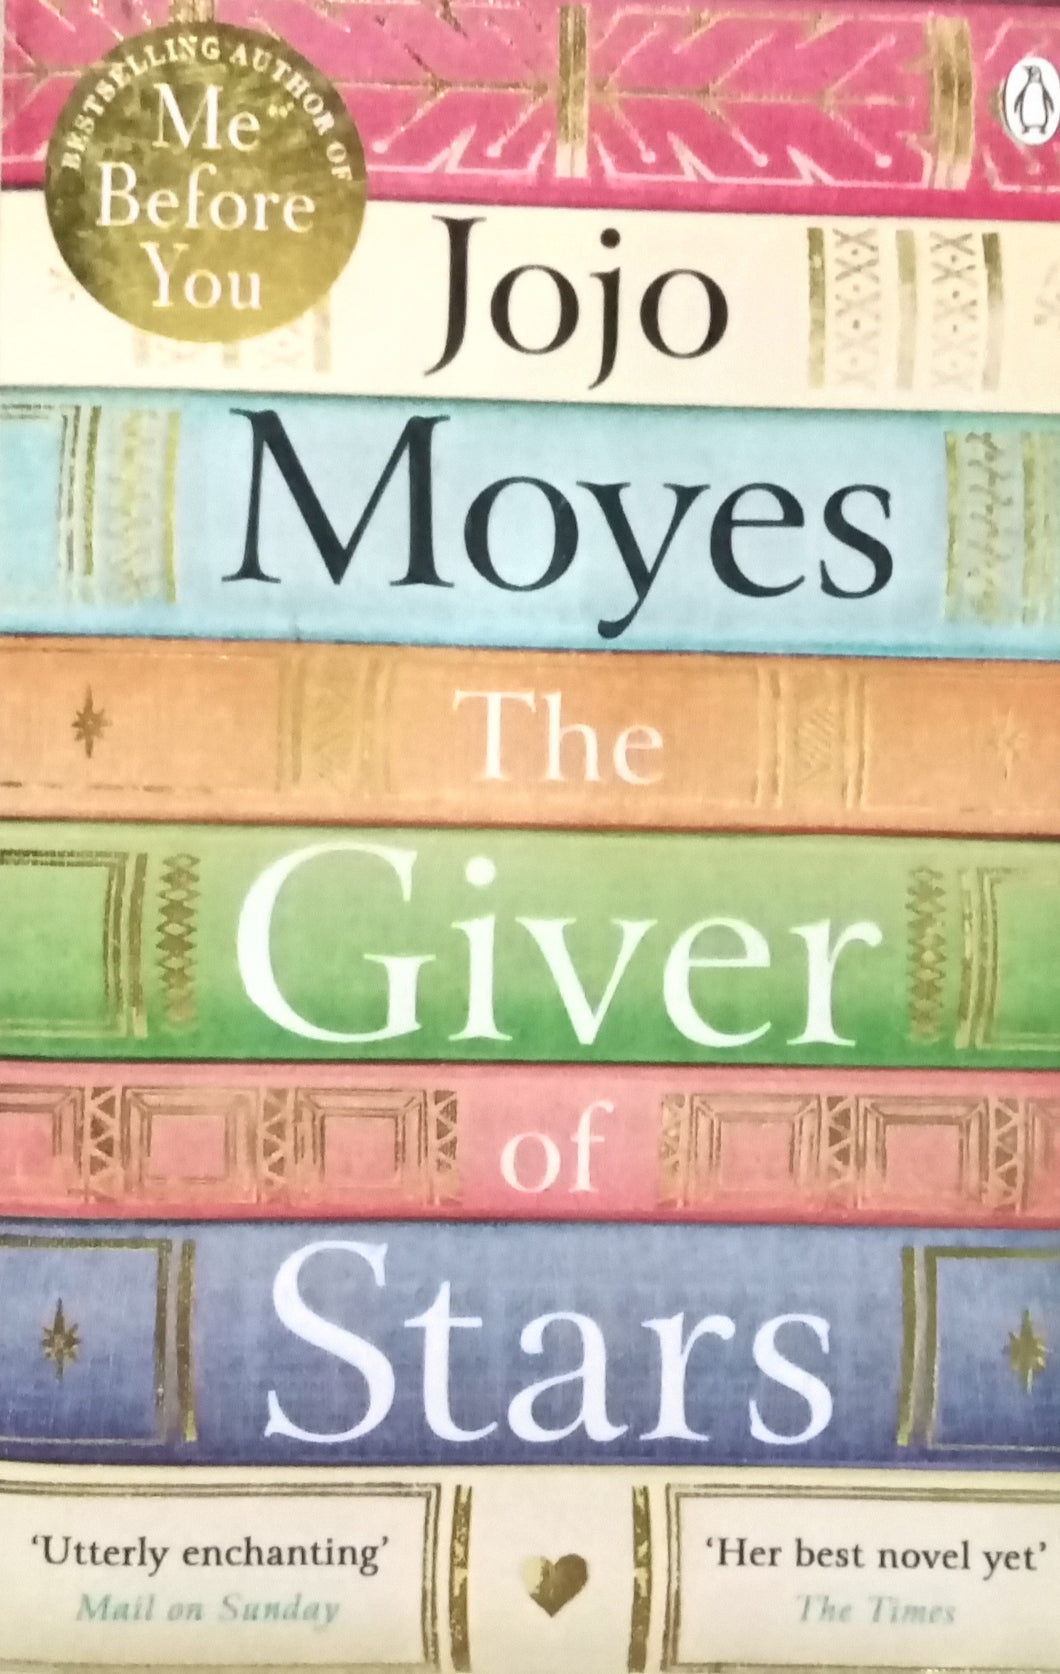 The Giver of Stars by Jojo Moyes